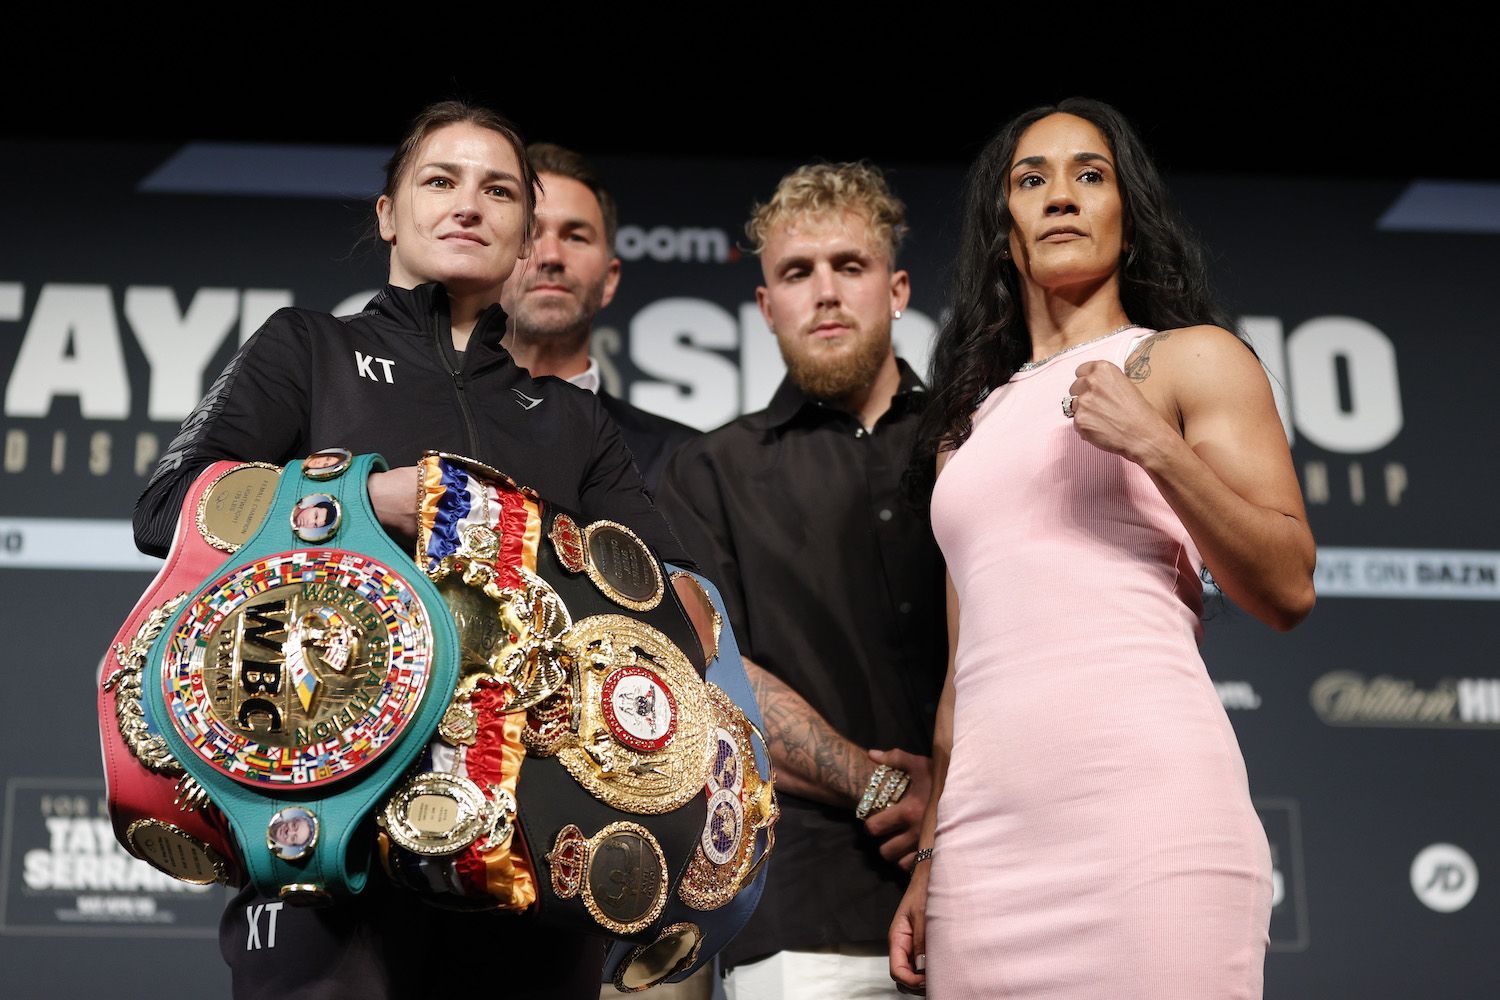 Irish boxer Katie Taylor ready to make history in New York